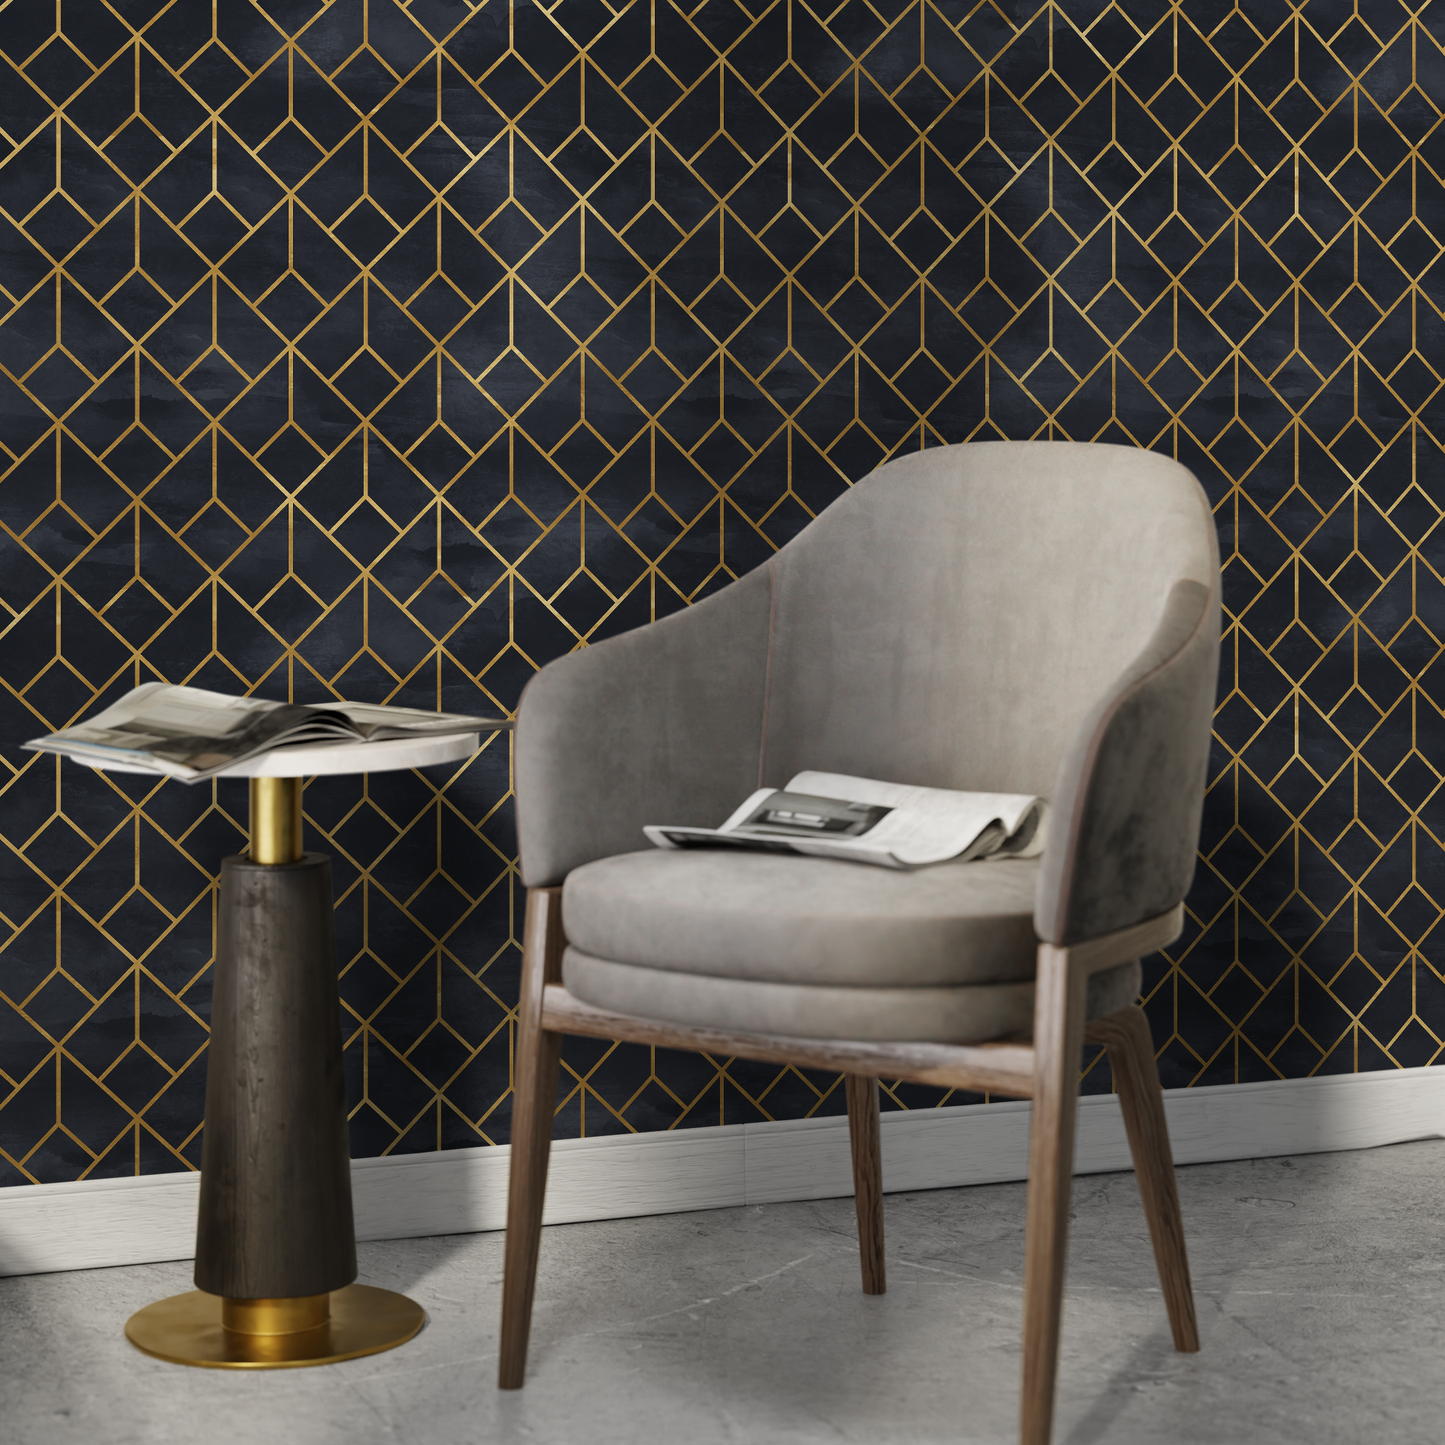 Removable Wallpaper Peel and Stick Wallpaper Wall Paper Wall Mural - Black and Non-Metalic Yellow Gold Color - A392